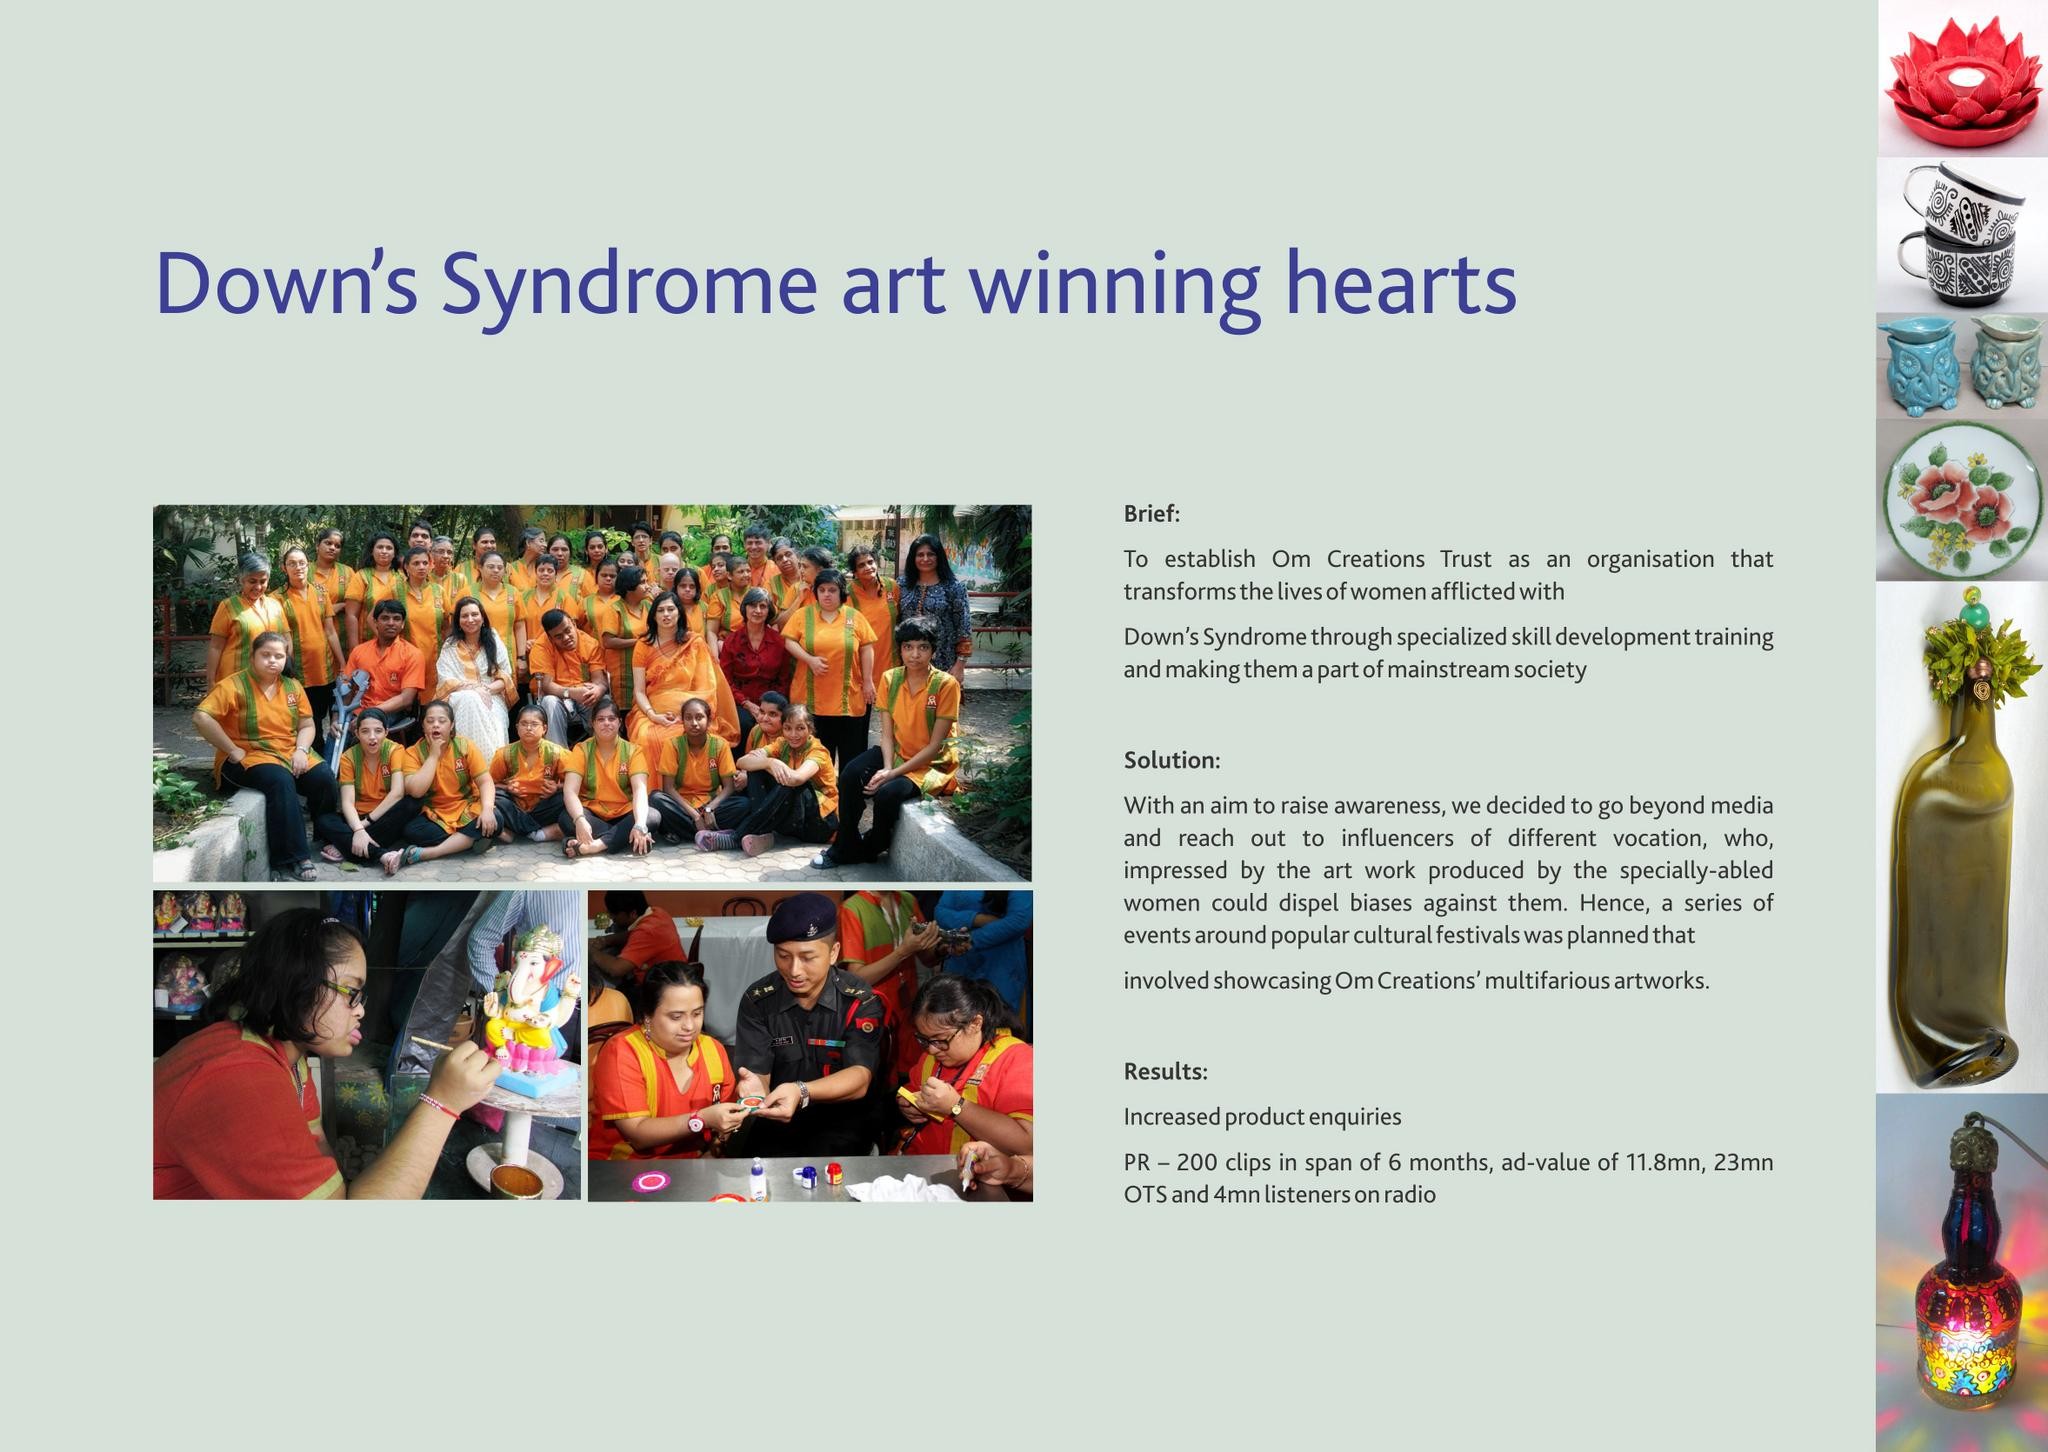 Down Syndrome Art winning Hearts